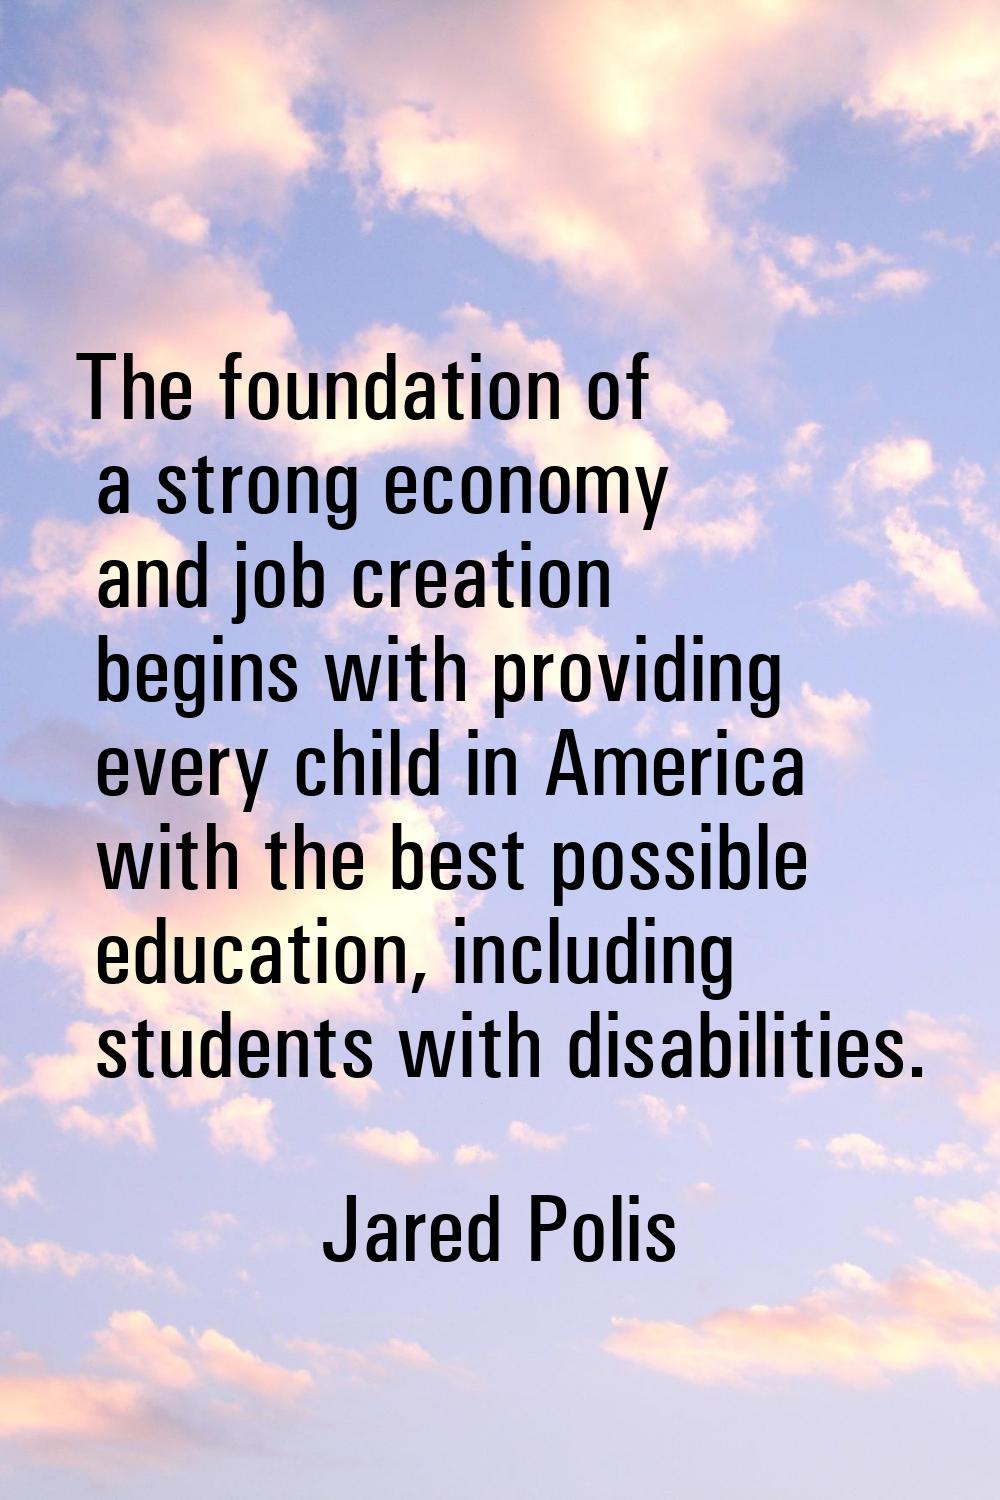 The foundation of a strong economy and job creation begins with providing every child in America wi